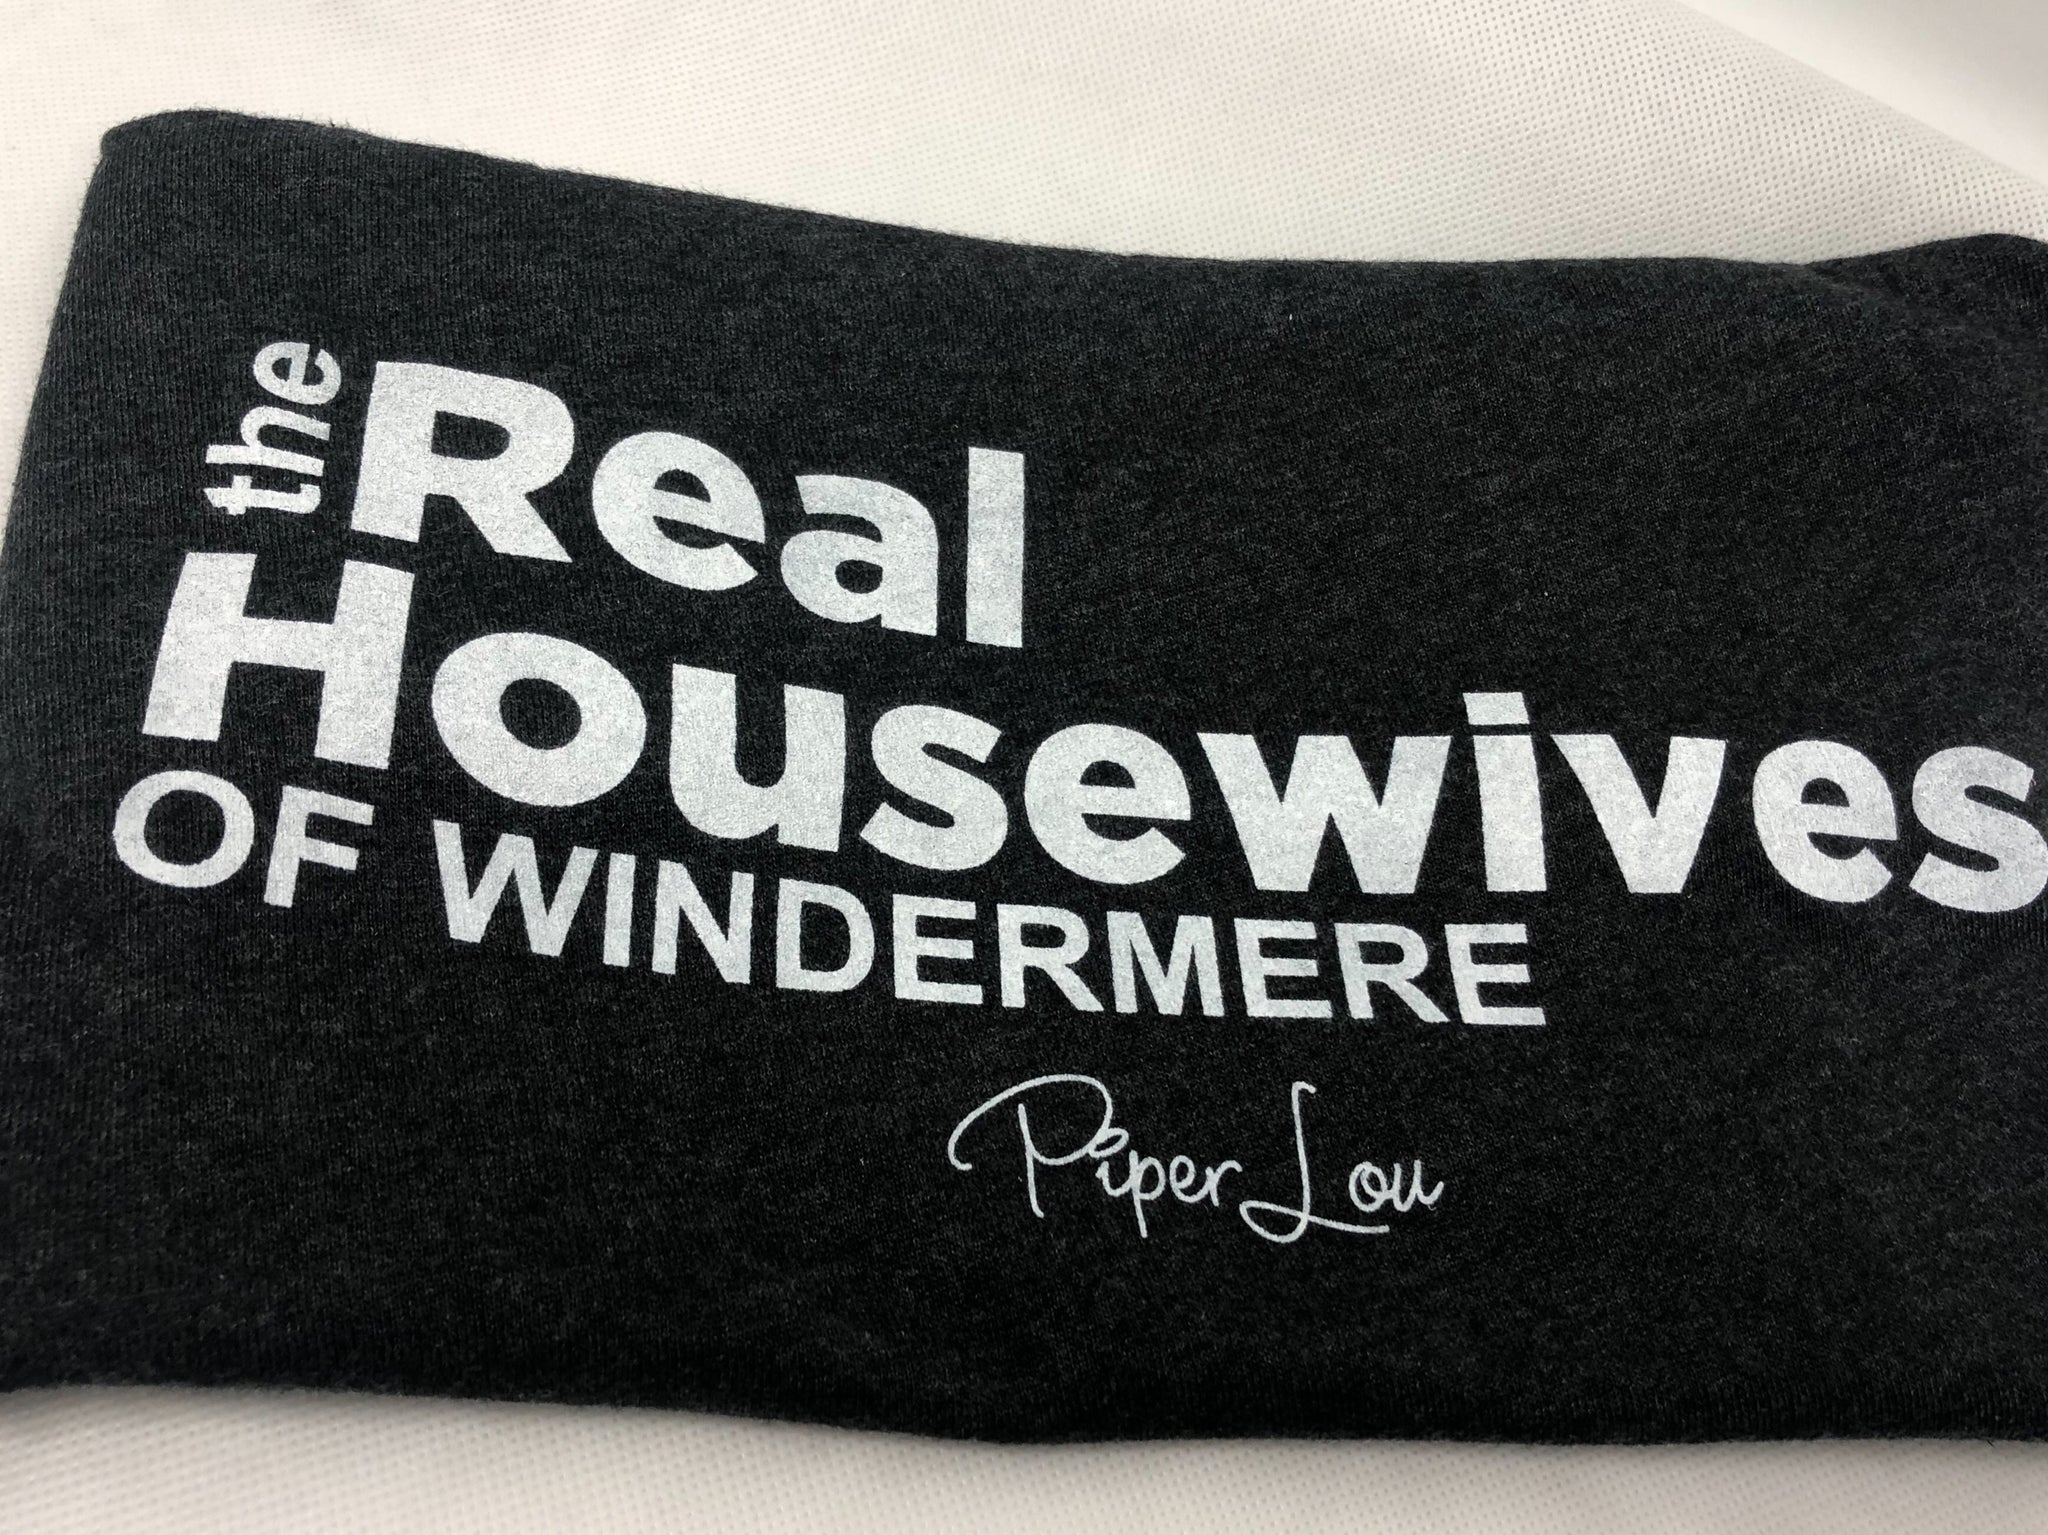 "Real Housewives of Windermere" Tank